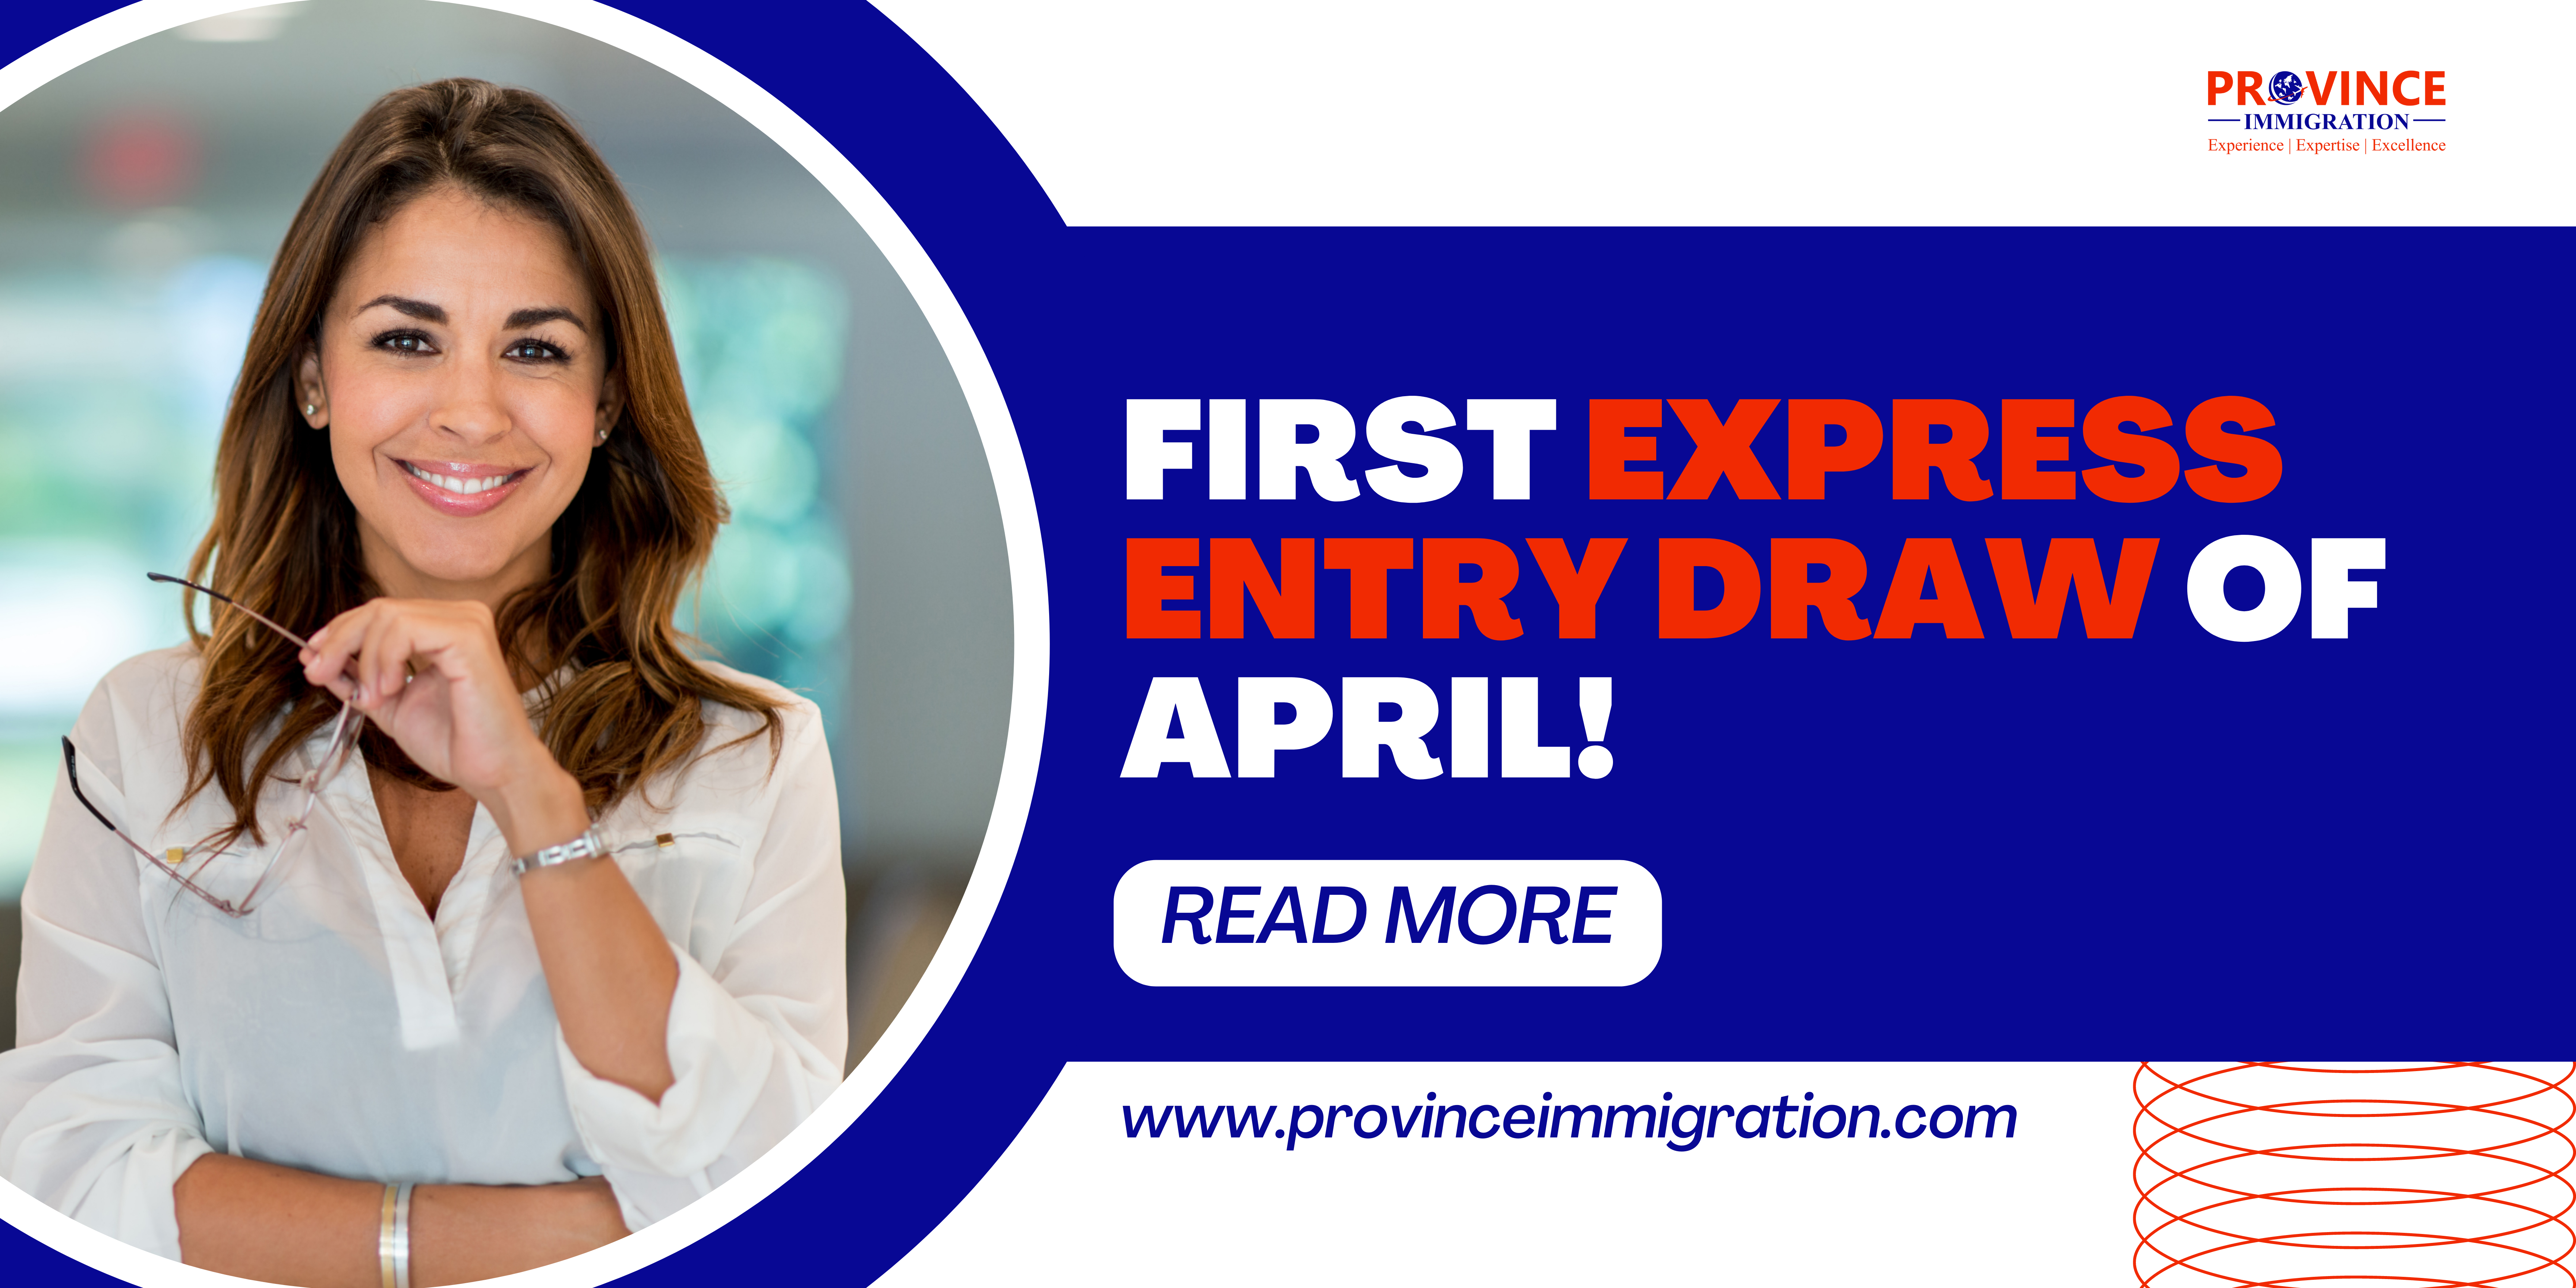 FIRST EXPRESS ENTRY DRAW OF APRIL!